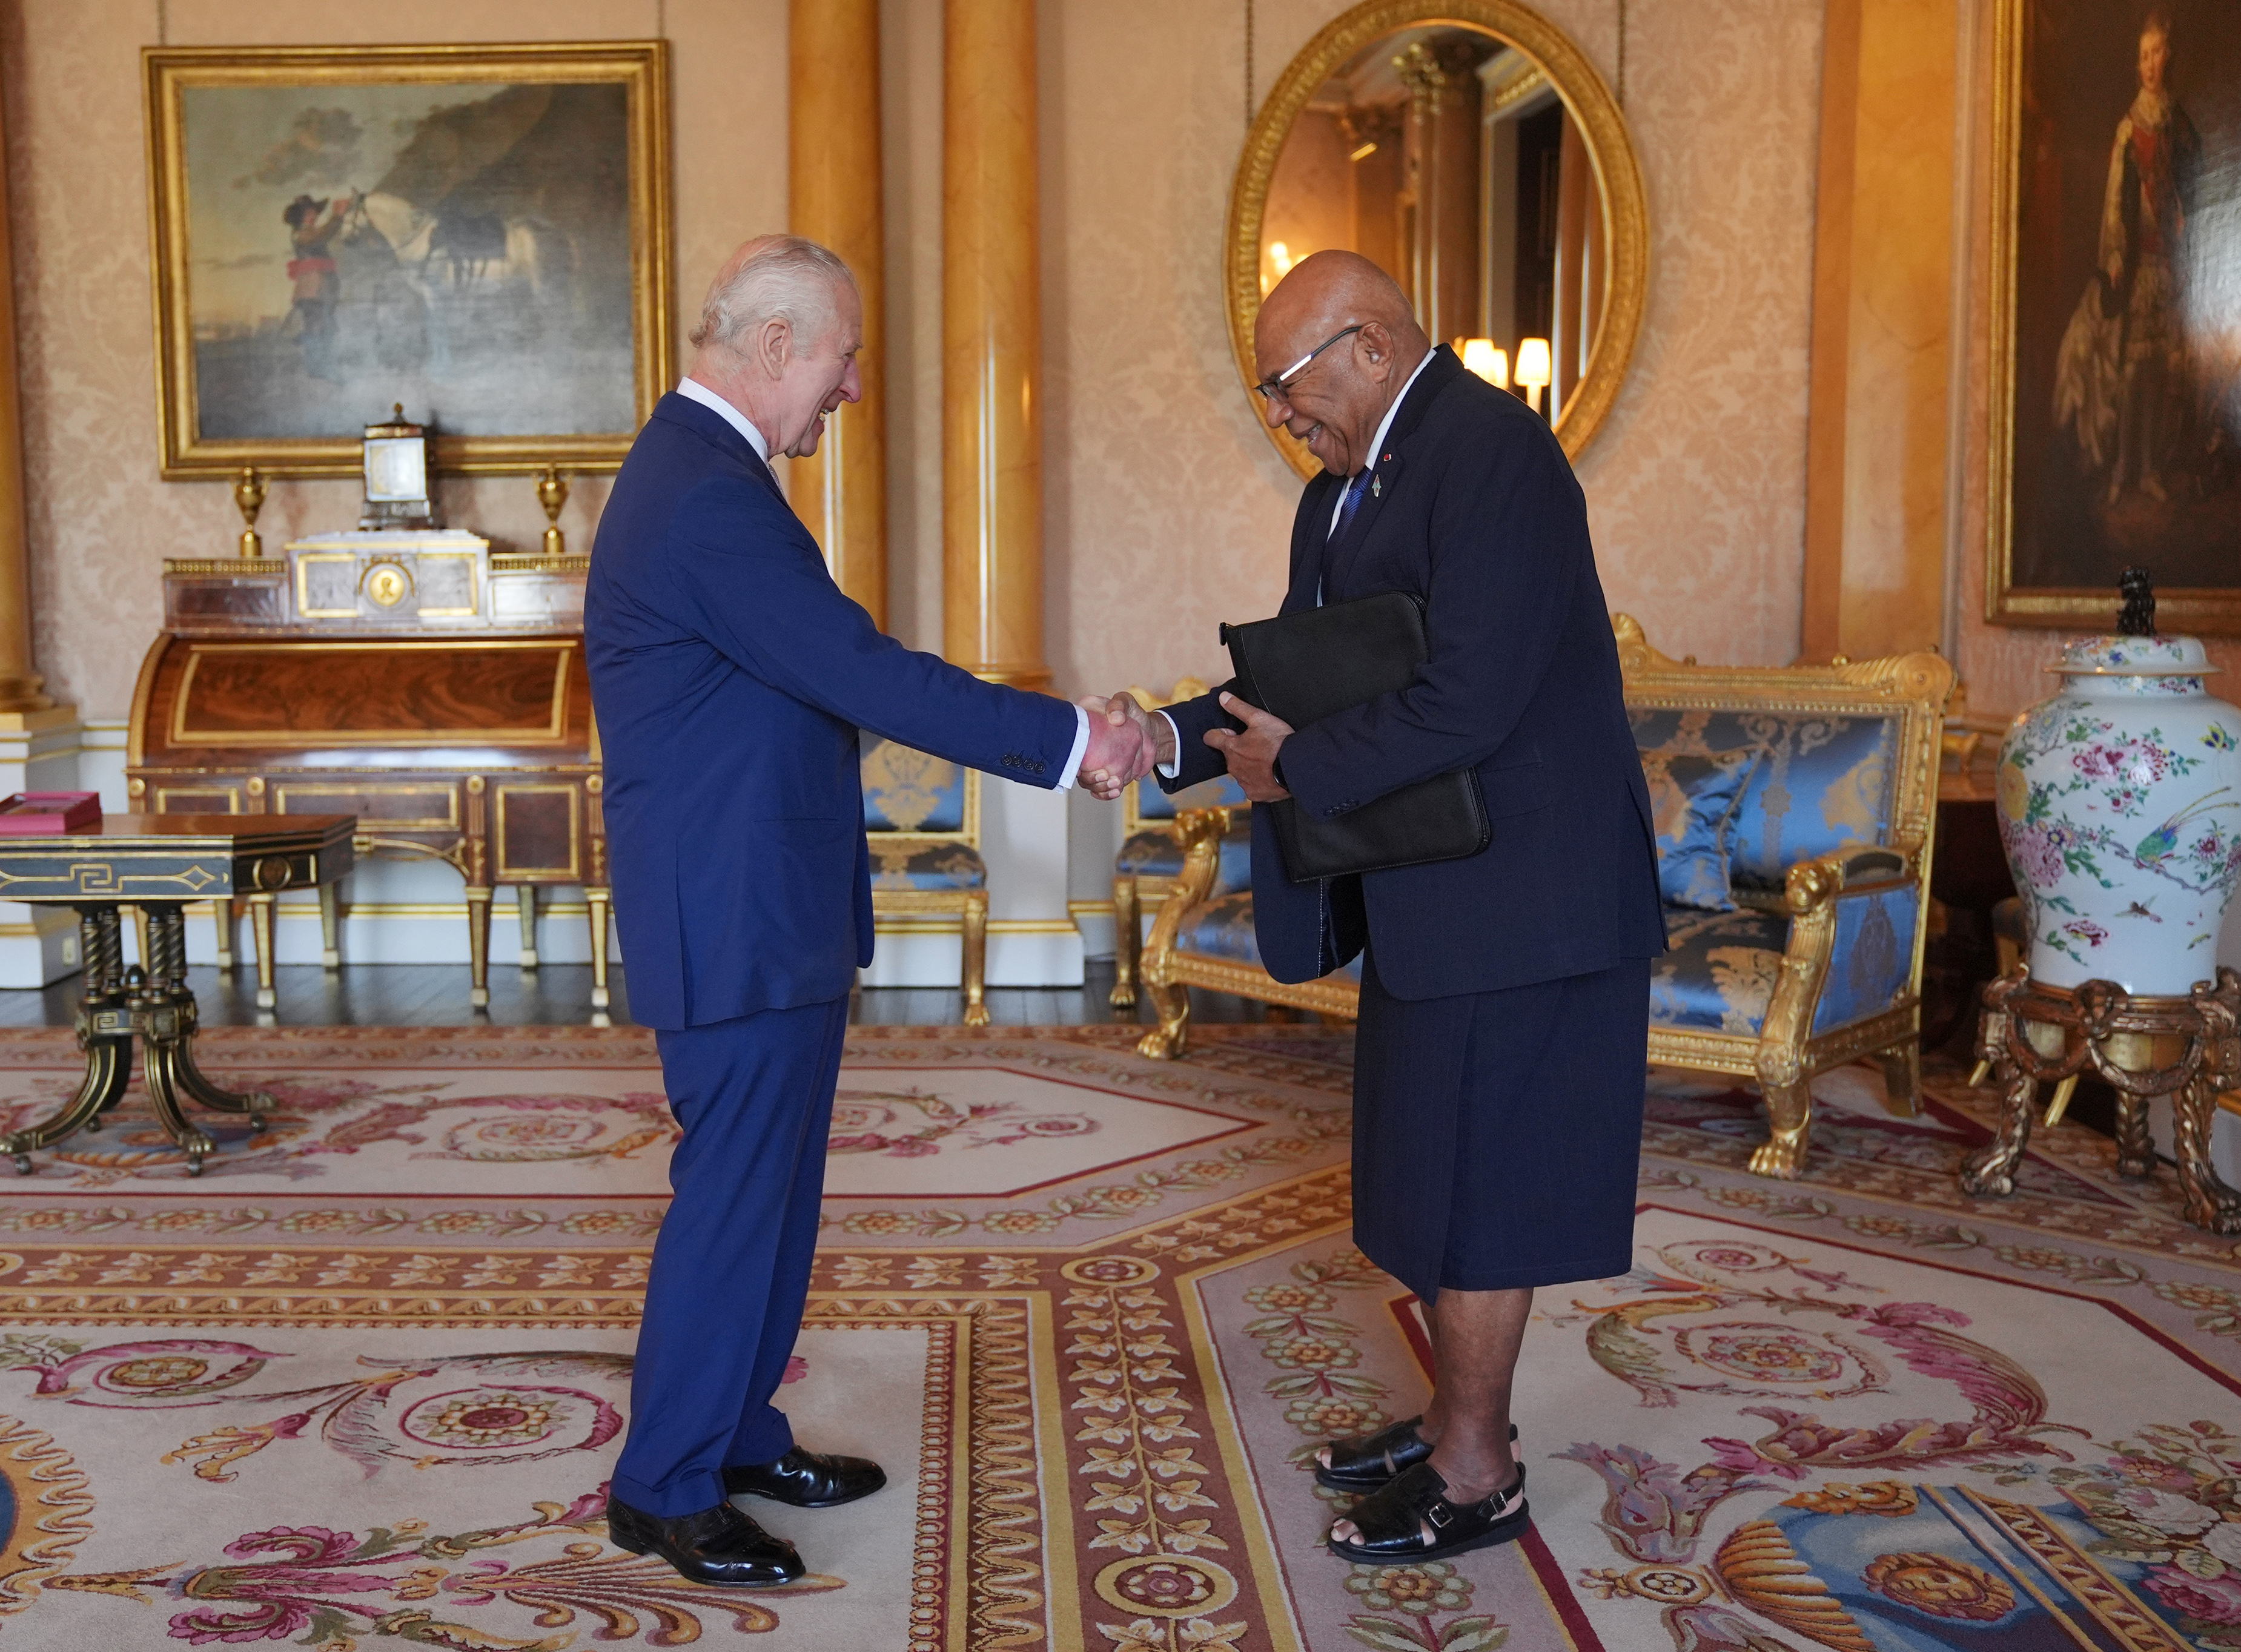 King Charles III and the Prime Minister of Fiji Sitiveni Rabuka during an audience at Buckingham Palace in London, England on May 7, 2024 | Source: Getty Images